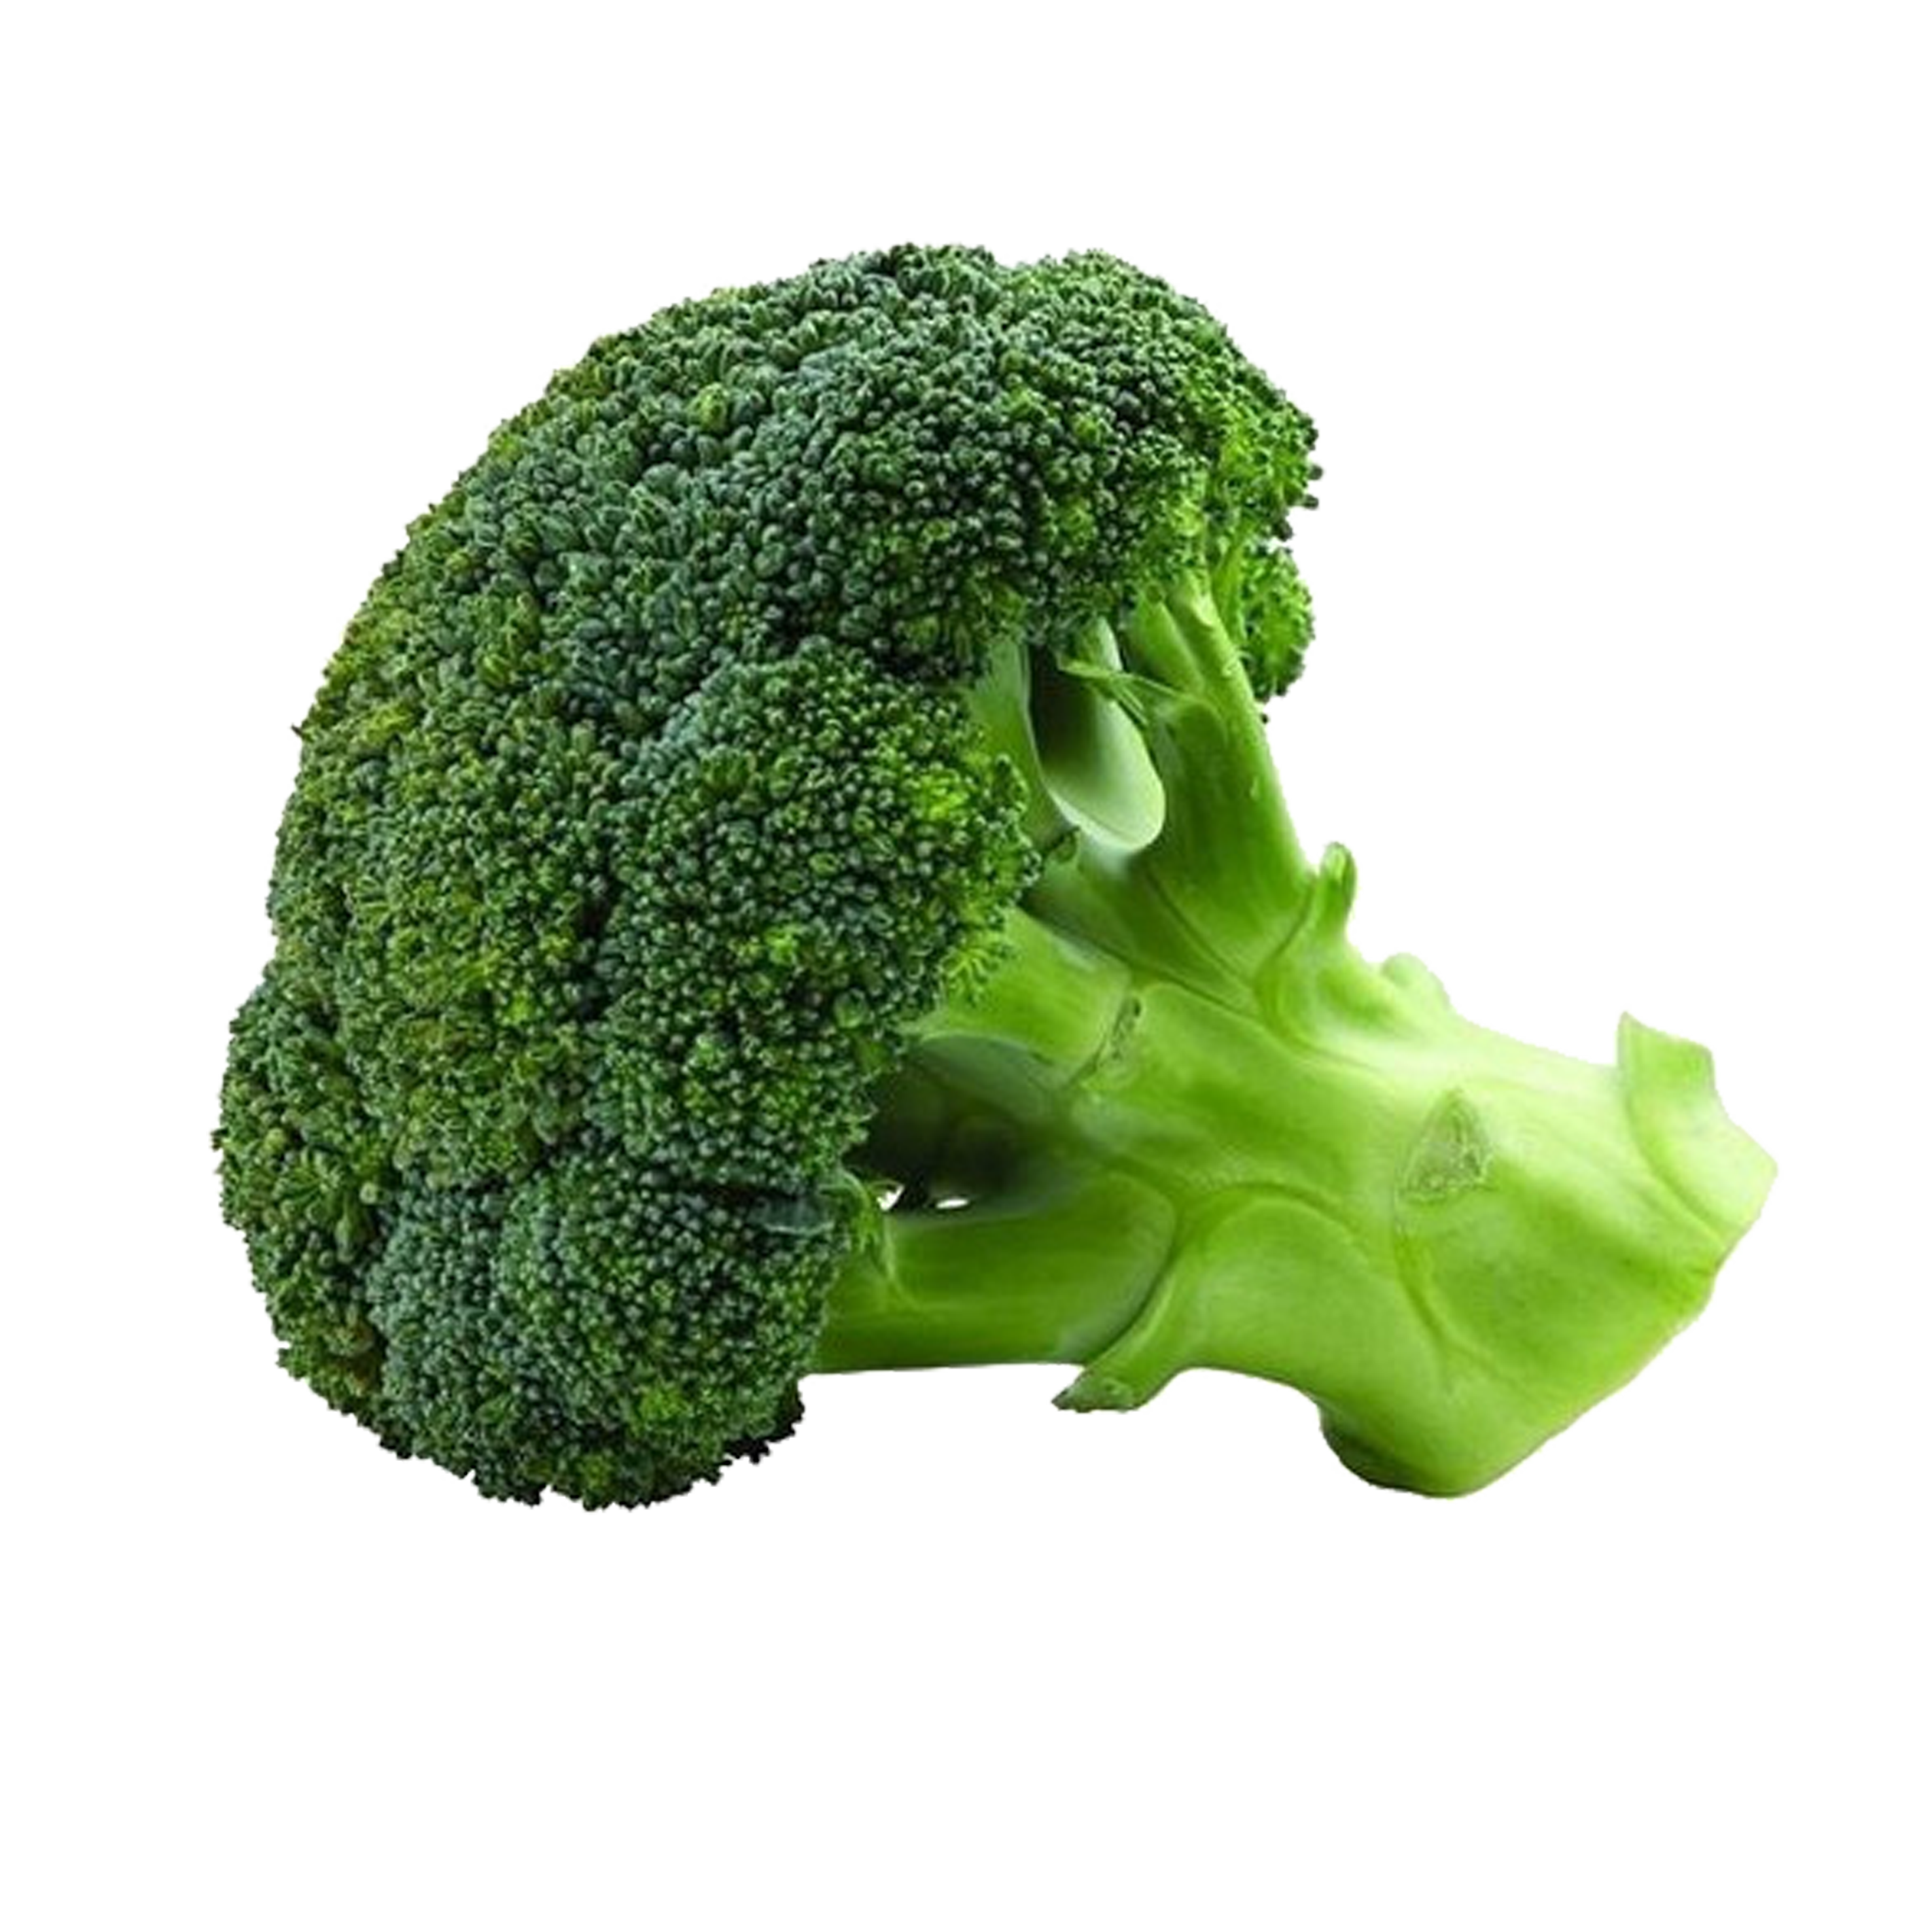 Chinese Broccoli PNG HD Images - Broccoli Png